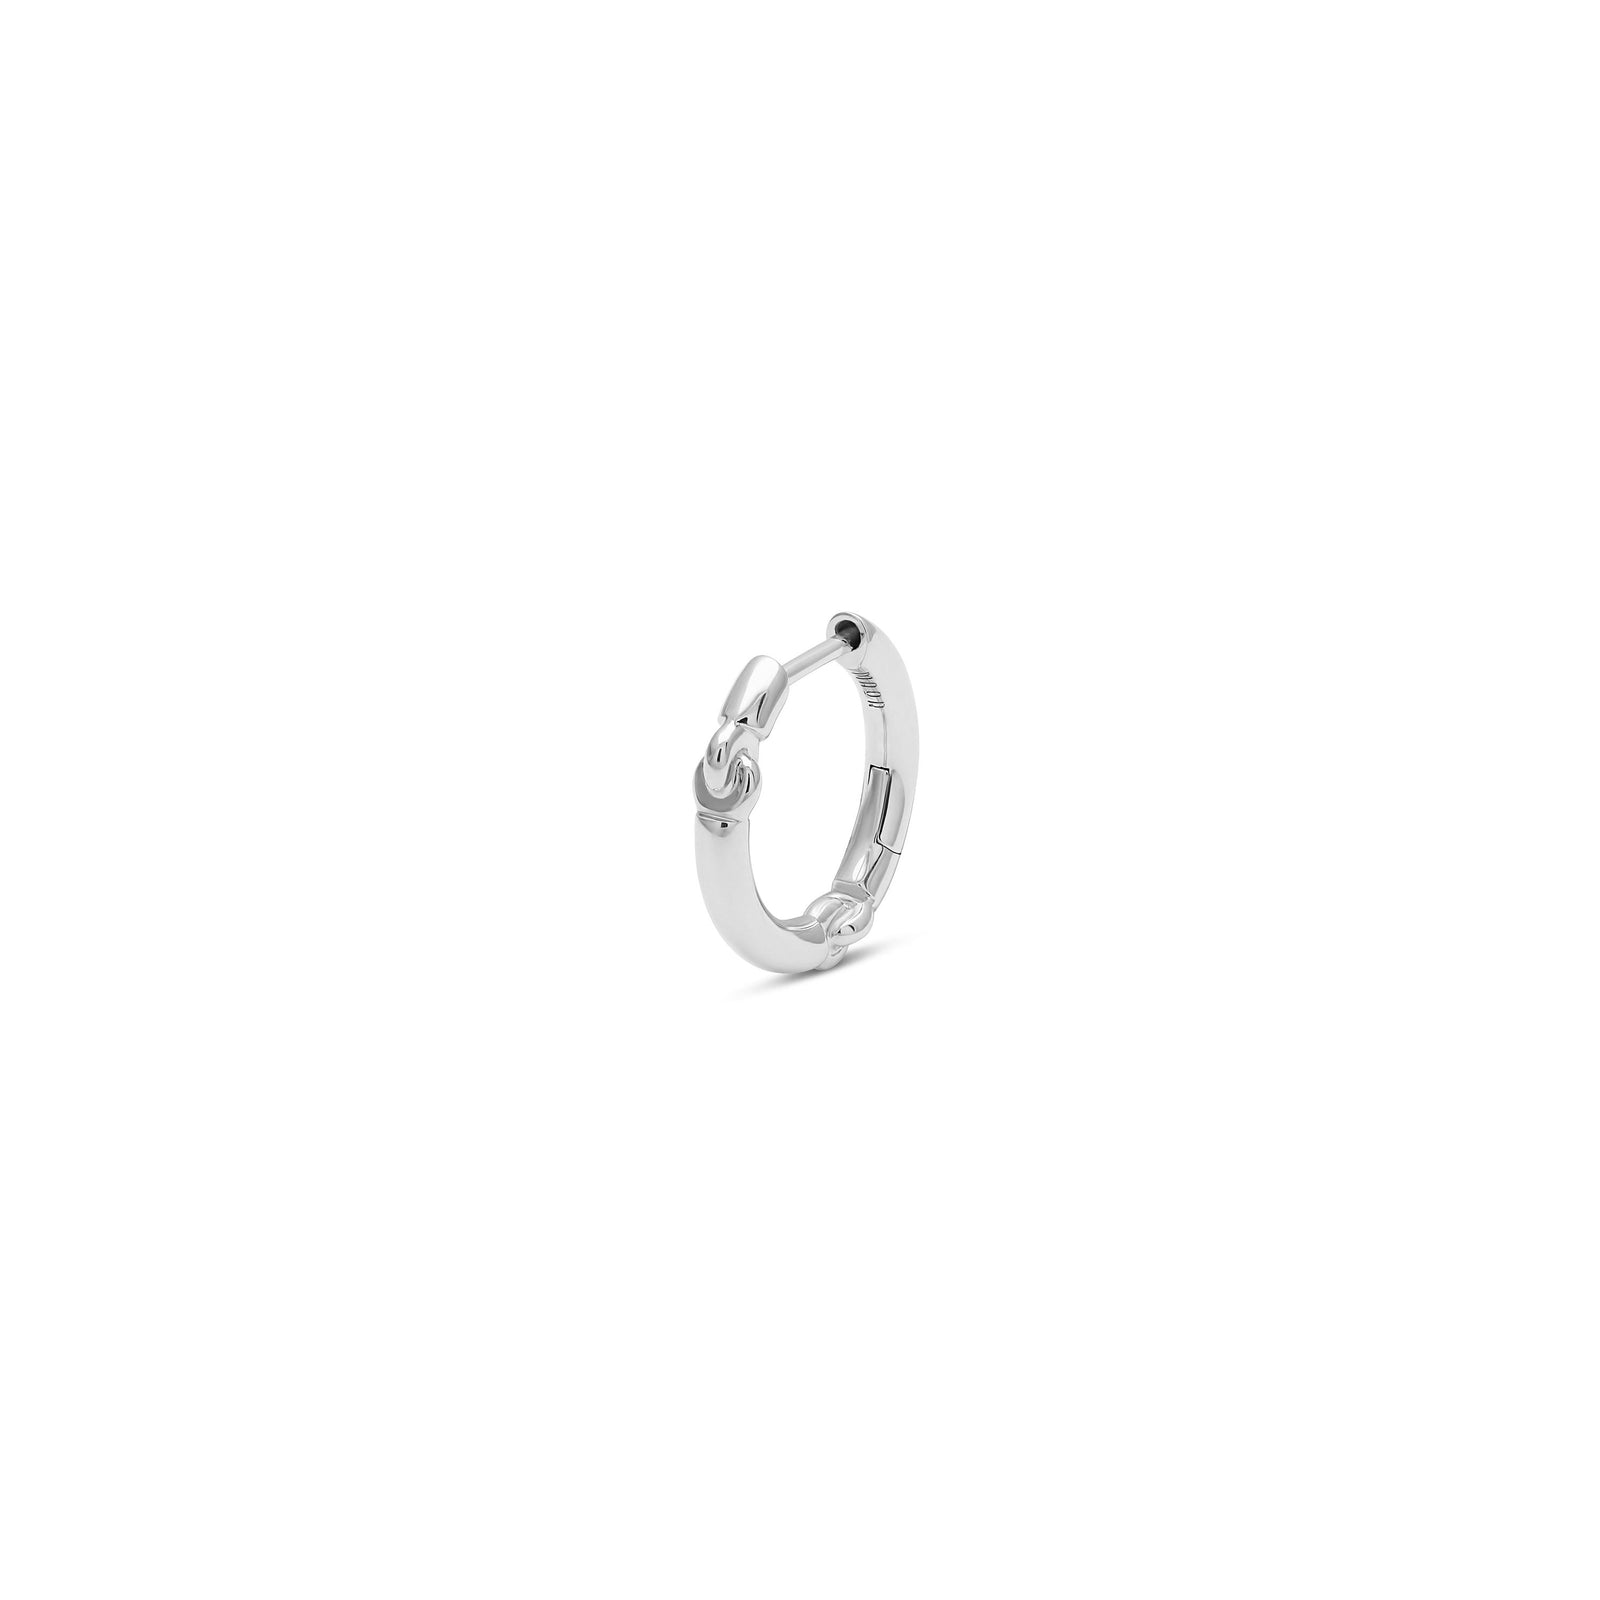 Equinox Single Earring | Large Scale | Sterling Silver